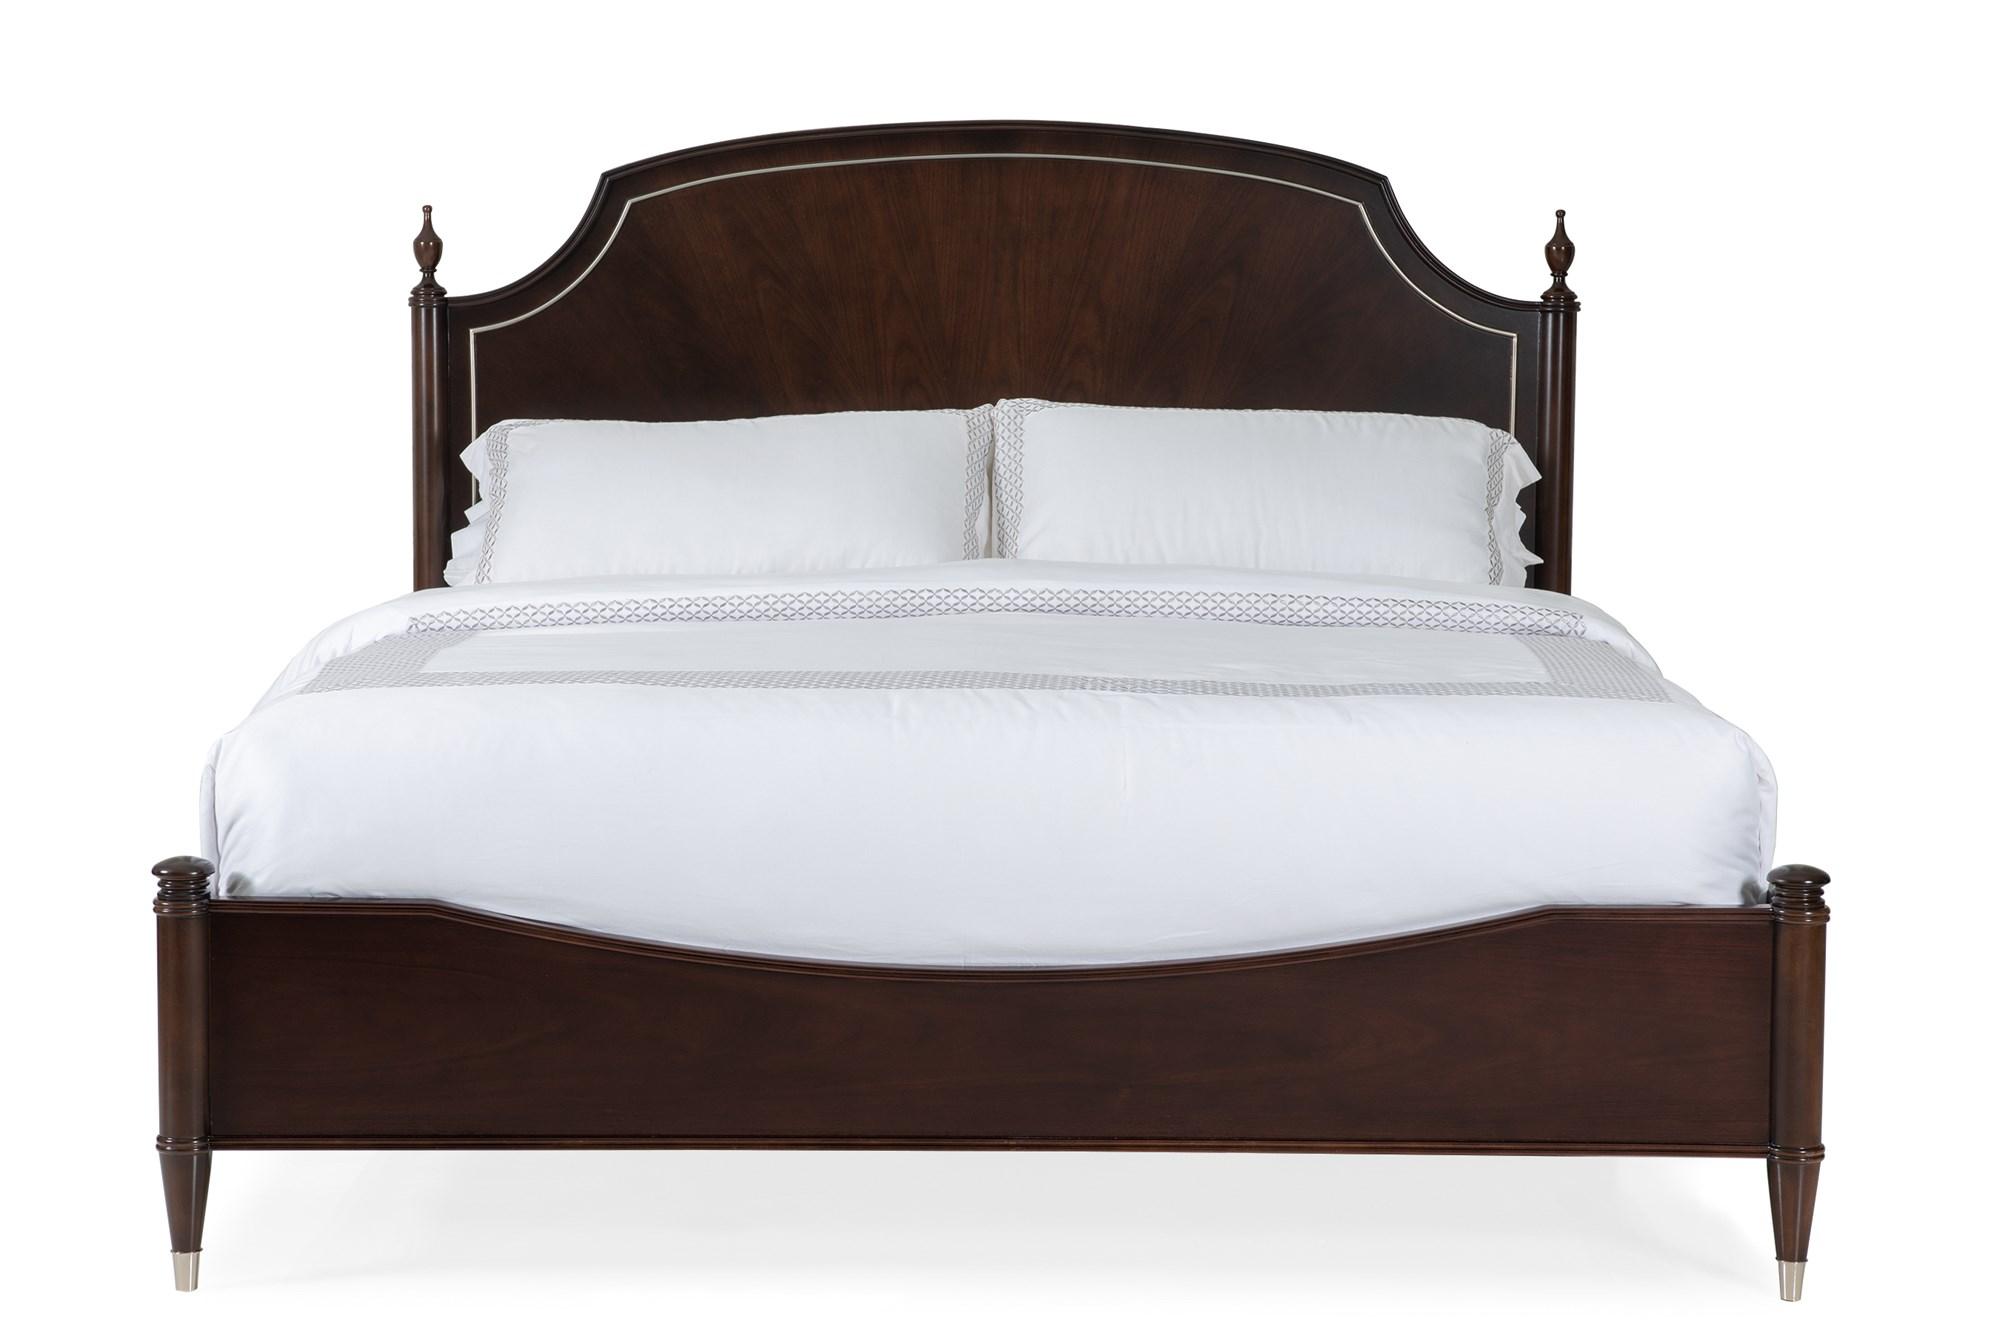 

    
Mocha Walnut & Soft Silver Paint Finish King Bed SUITE DREAMS by Caracole
